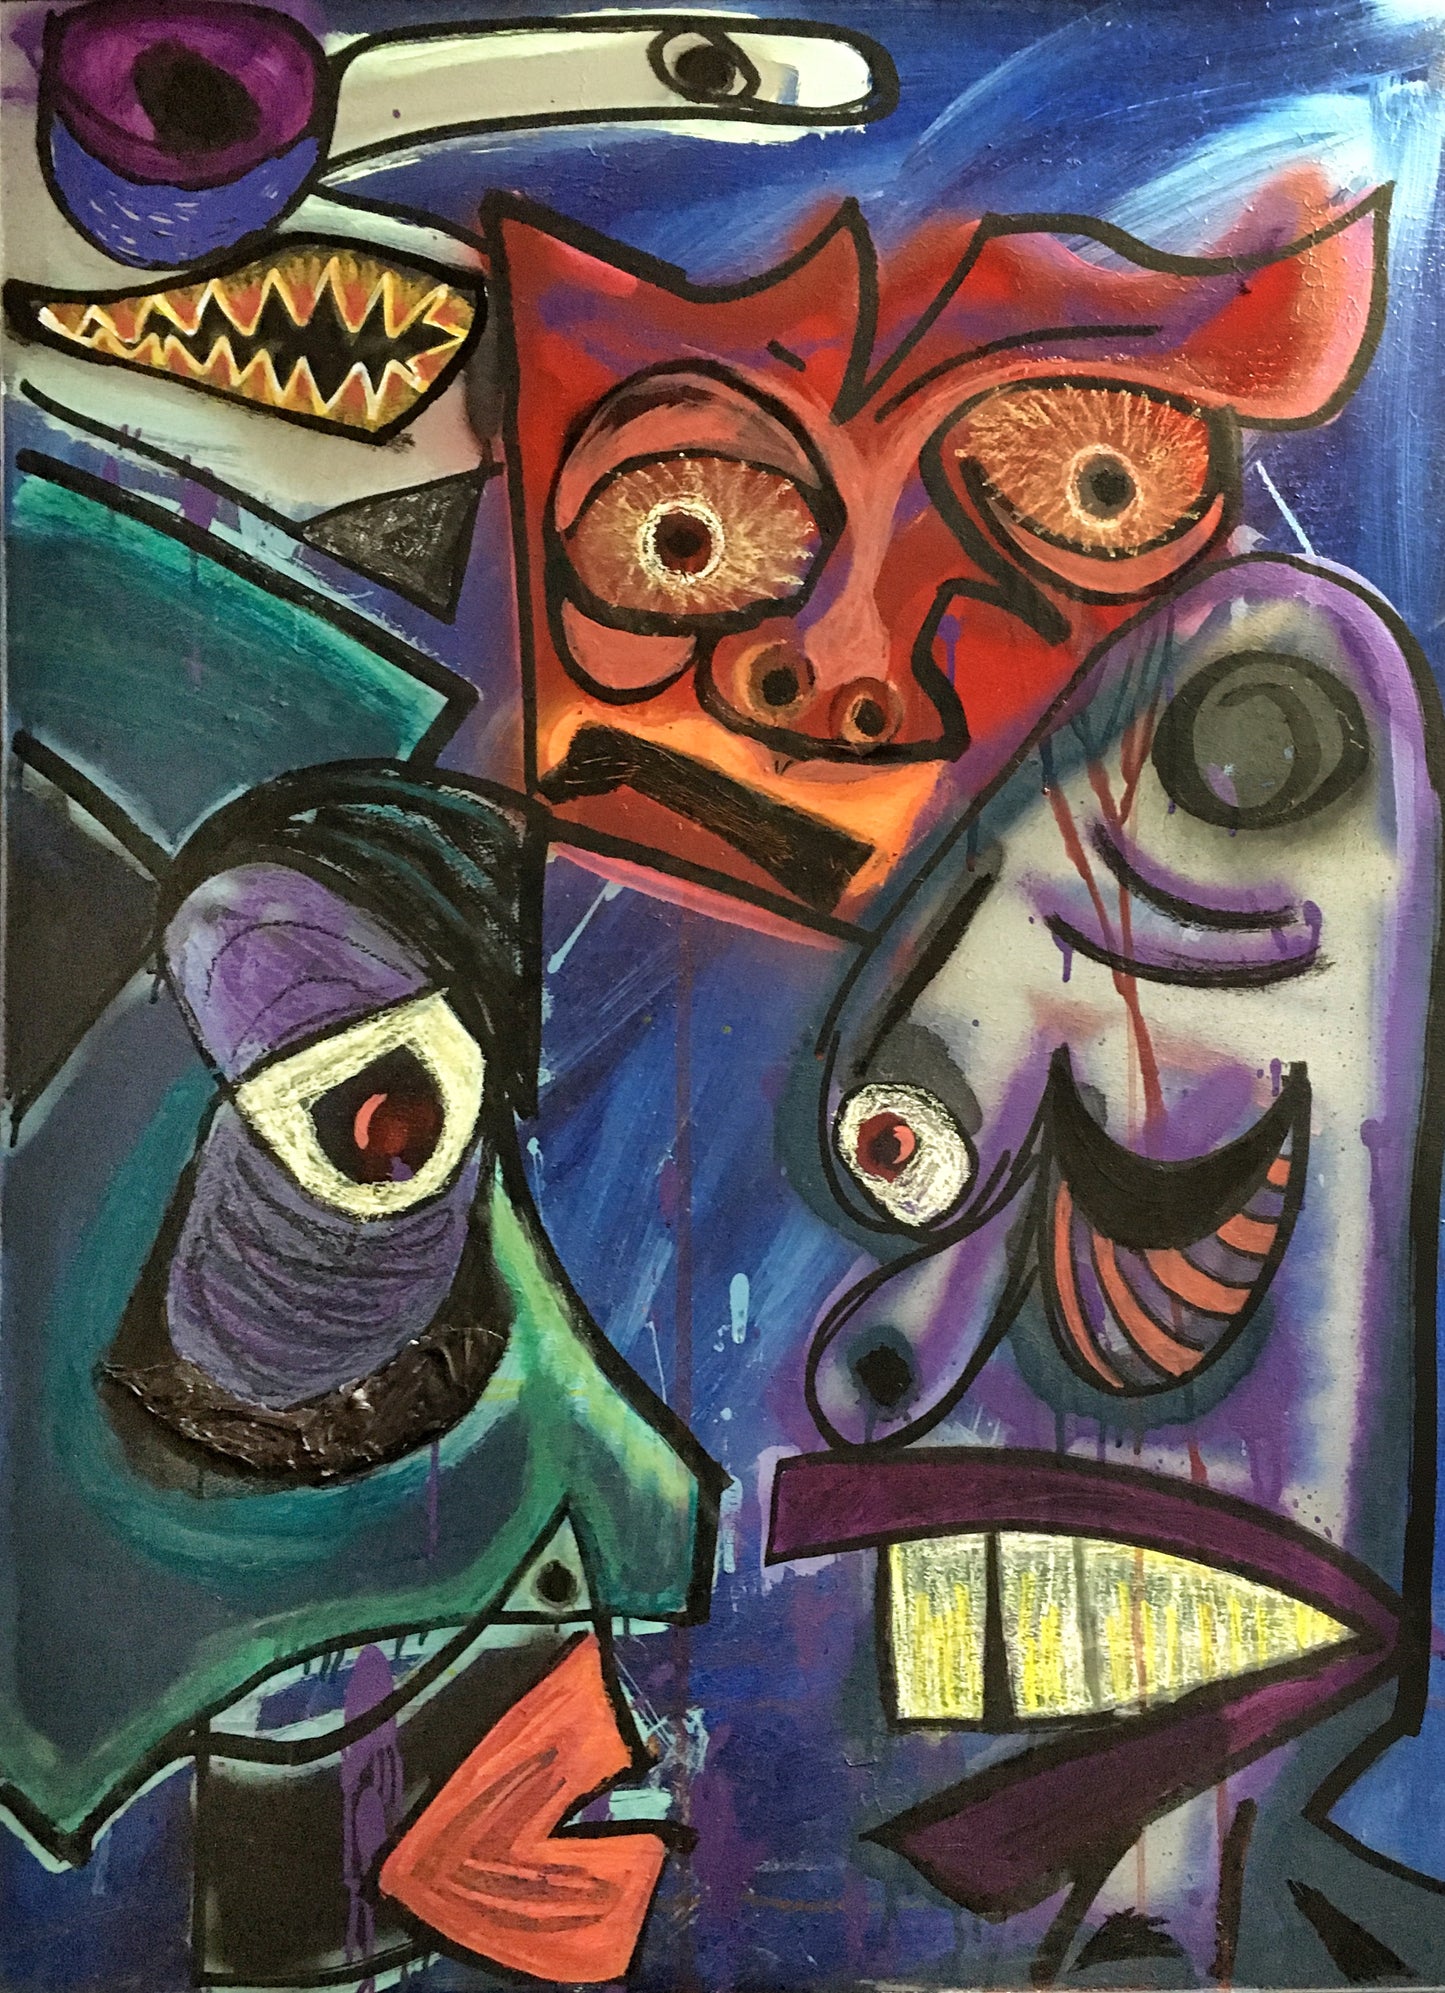 Mixed Media Painting “Making Friends” Framed on Canvas 4’x3’